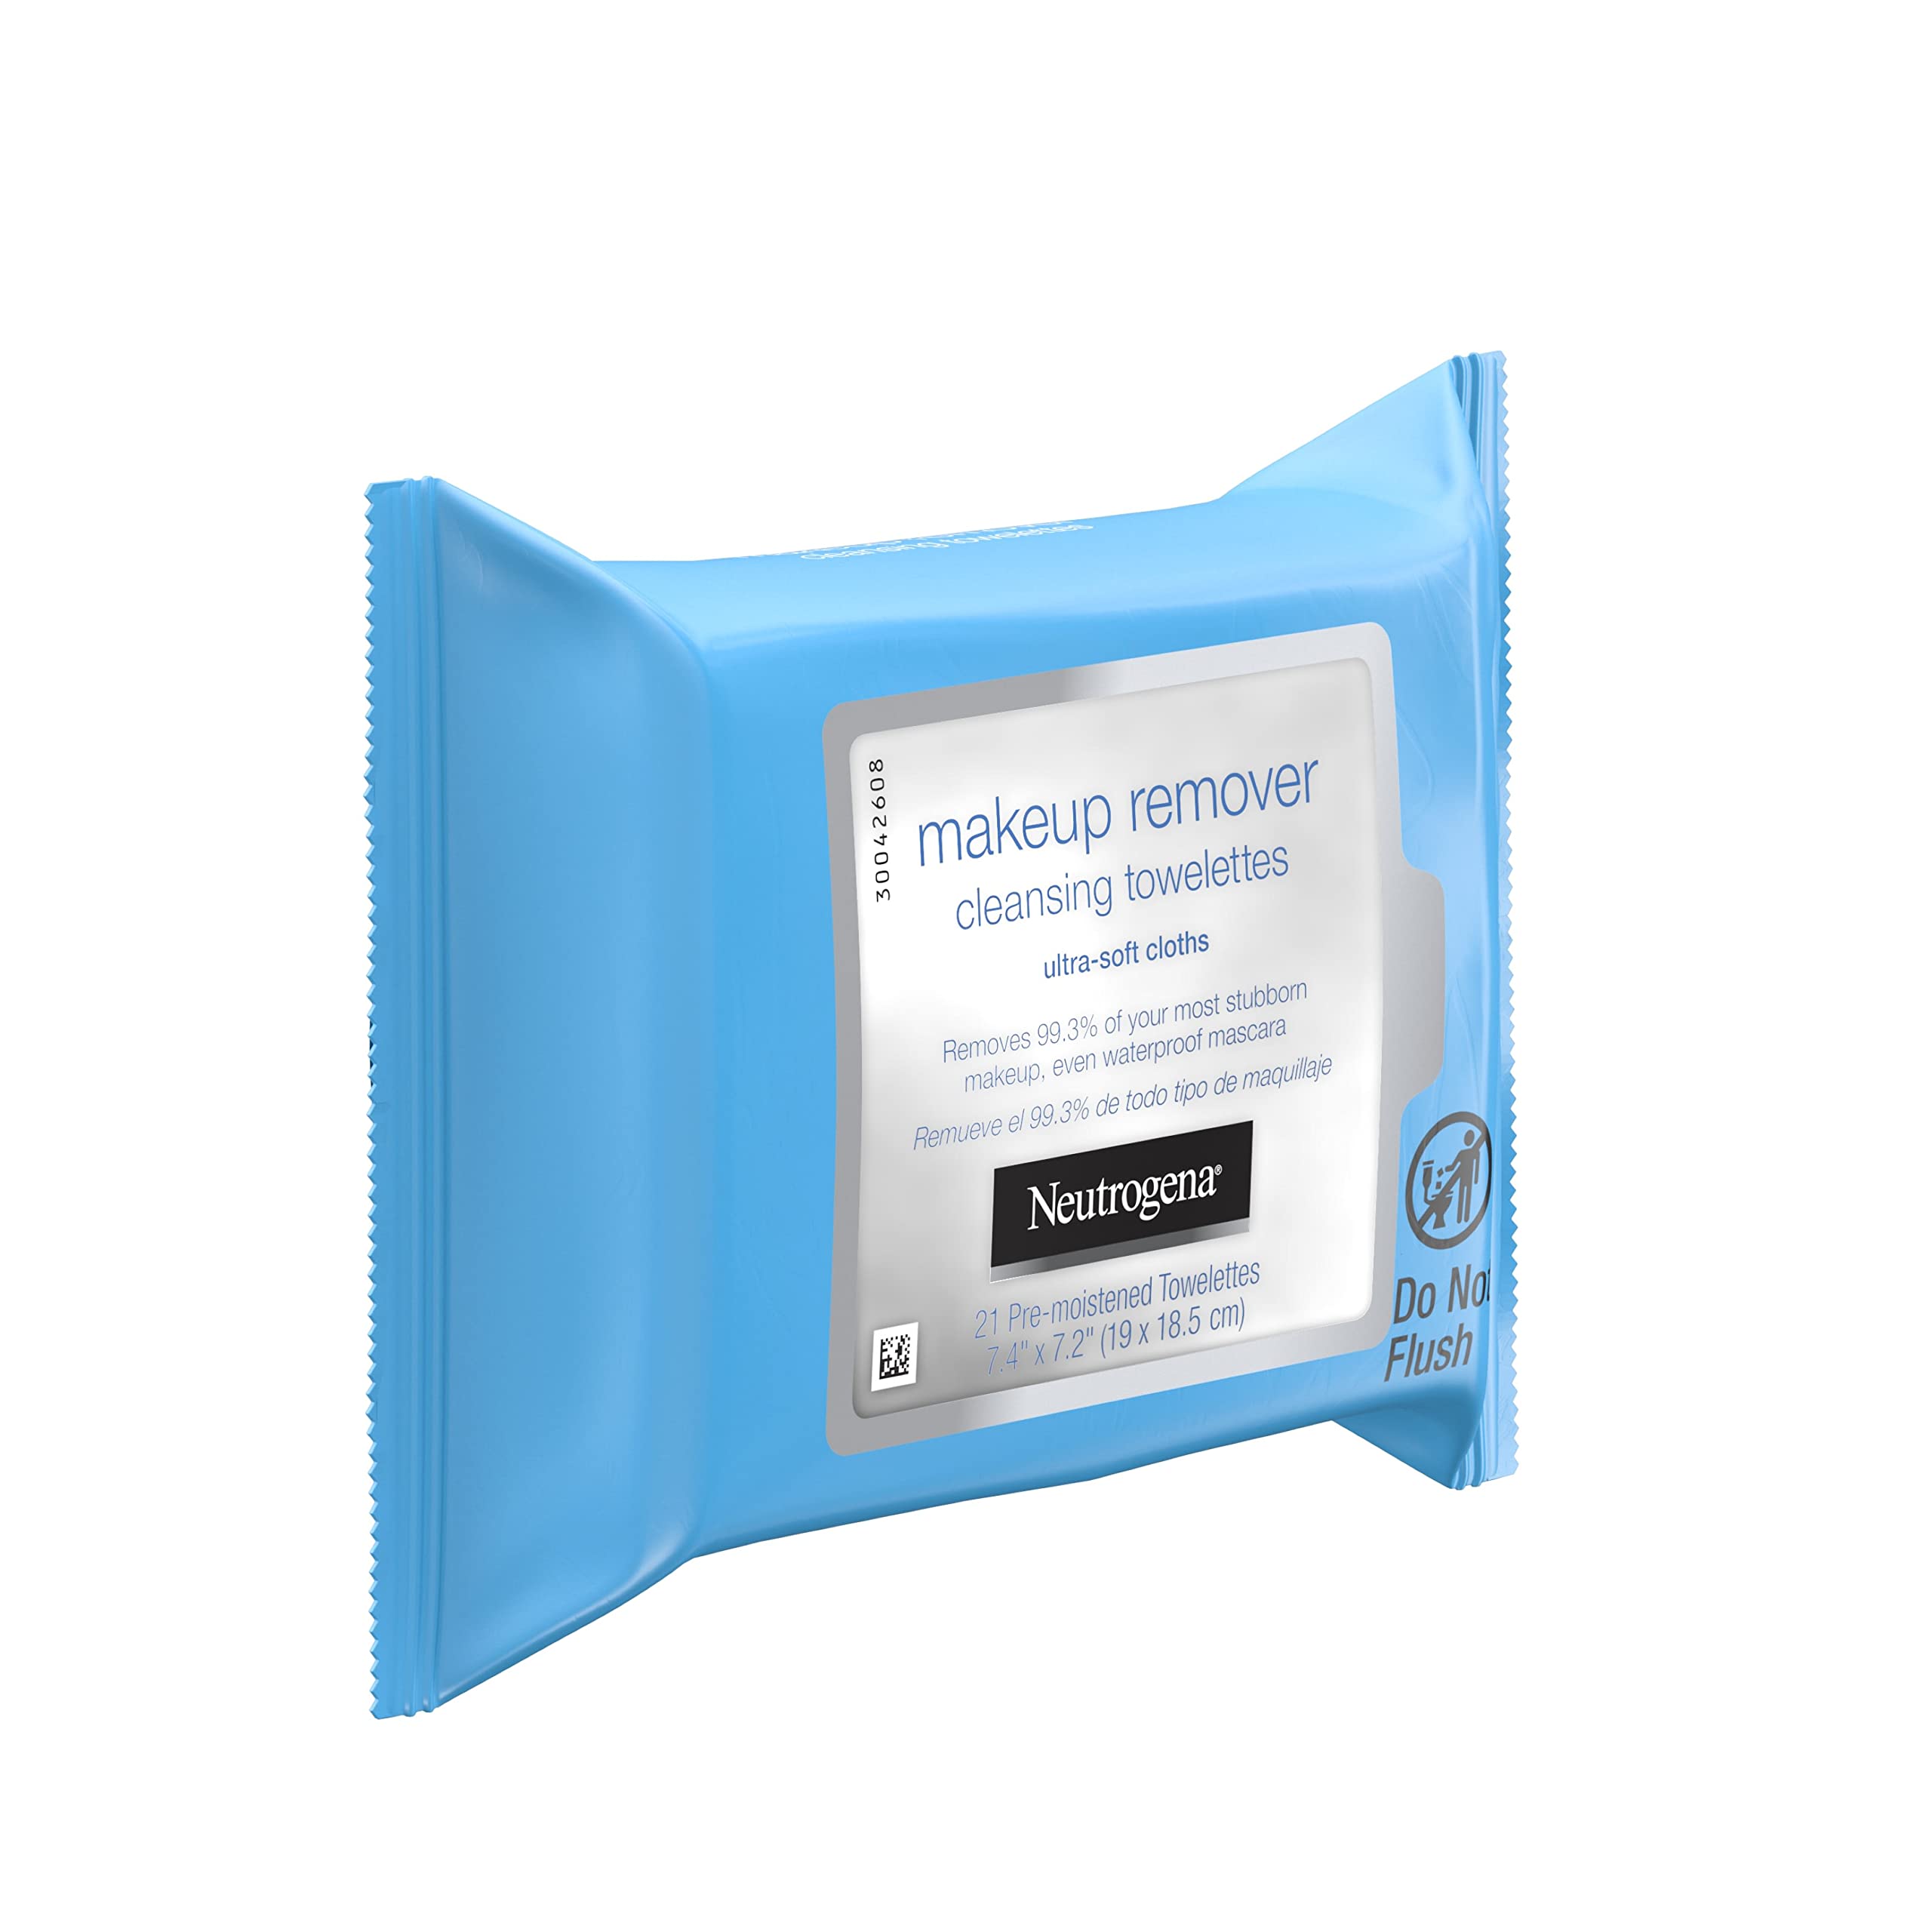 Neutrogena Makeup Remover Cleansing Facial Towelettes, Daily Gentle Face Wipes to Remove Oil, Dirt, & 99.3% of Makeup, Safe for Sensitive Eyes, Alcohol Free Wipes in Resealable Pack, 21 ct (Pack of 3)